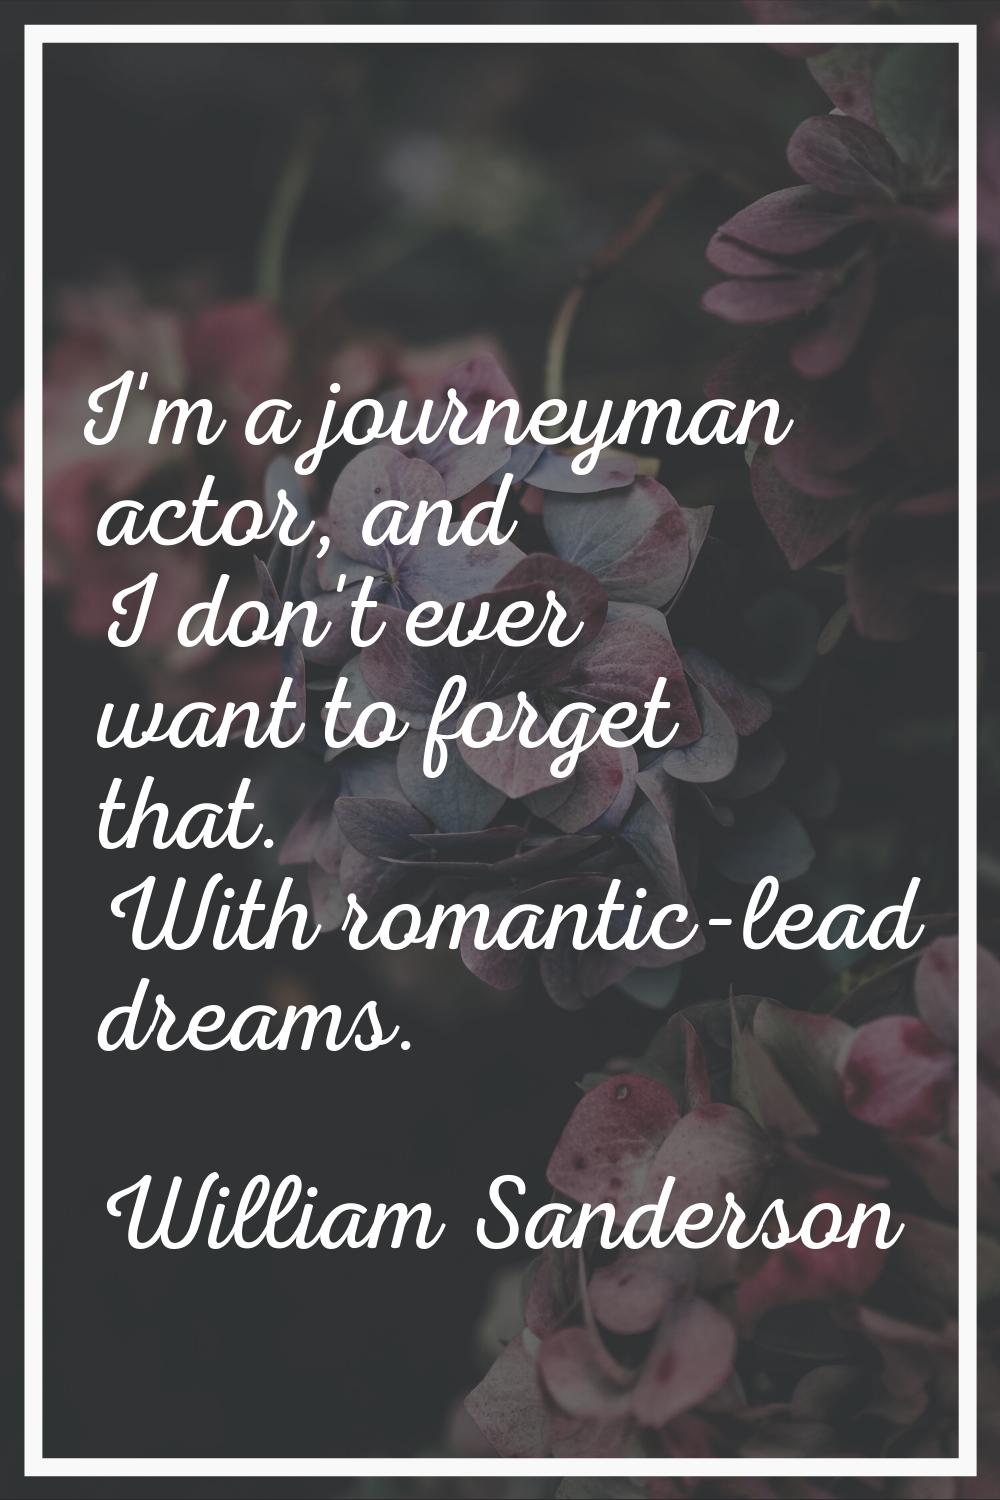 I'm a journeyman actor, and I don't ever want to forget that. With romantic-lead dreams.